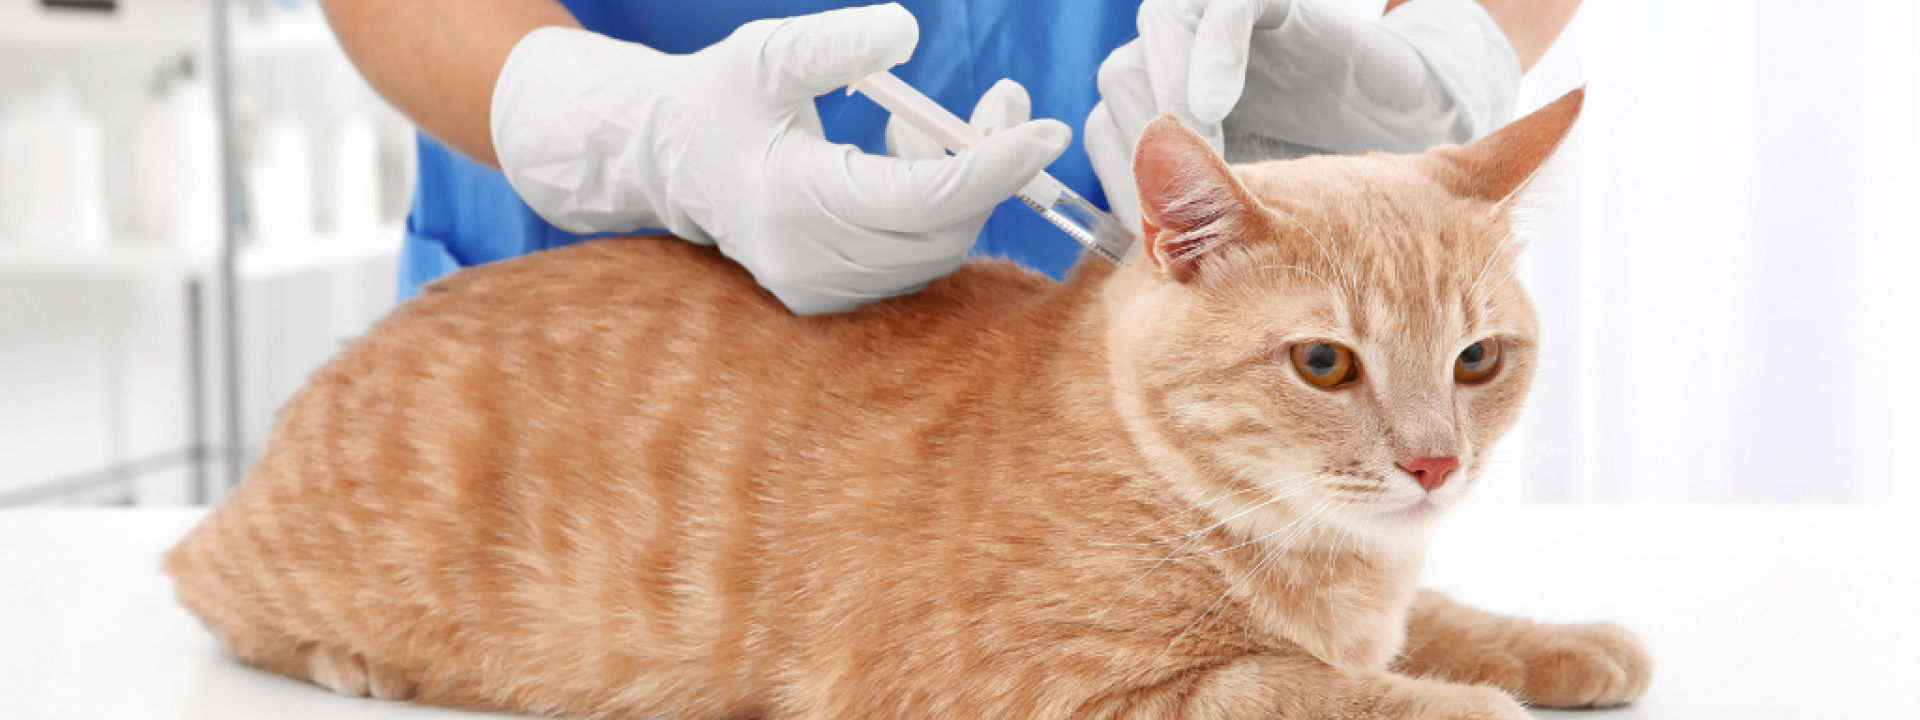 Veterinarian giving vaccination injection to a cat.